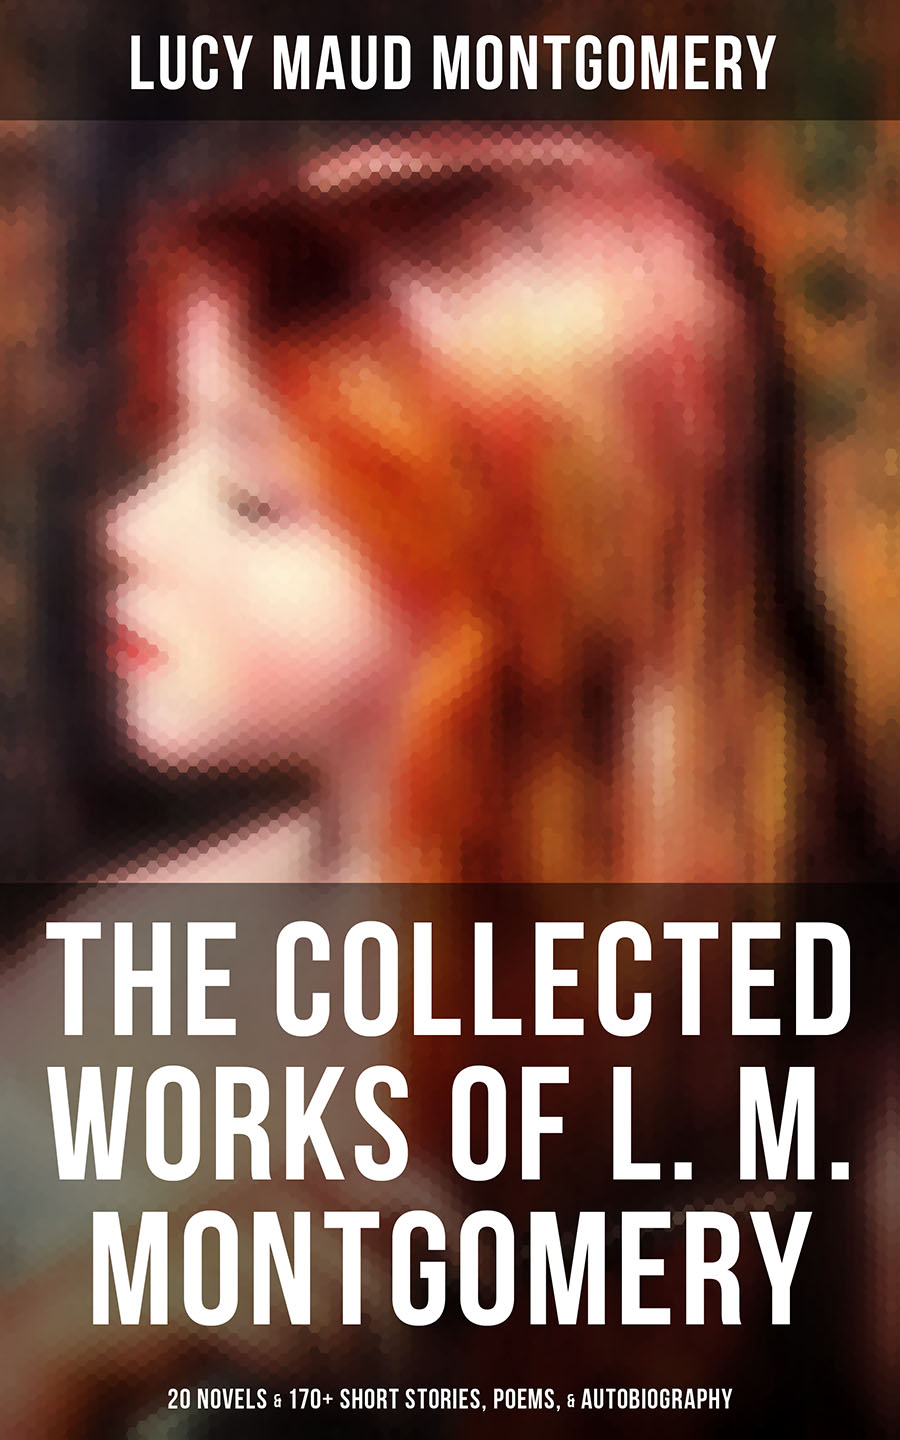 The Collected Works of Lucy Maud Montgomery: 20 Novels & 170+ Short Stories, Poems, Autobiography and Letters  (Including Complete Anne Shirley Series, Chronicles of Avonlea & Emily Starr Trilogy)